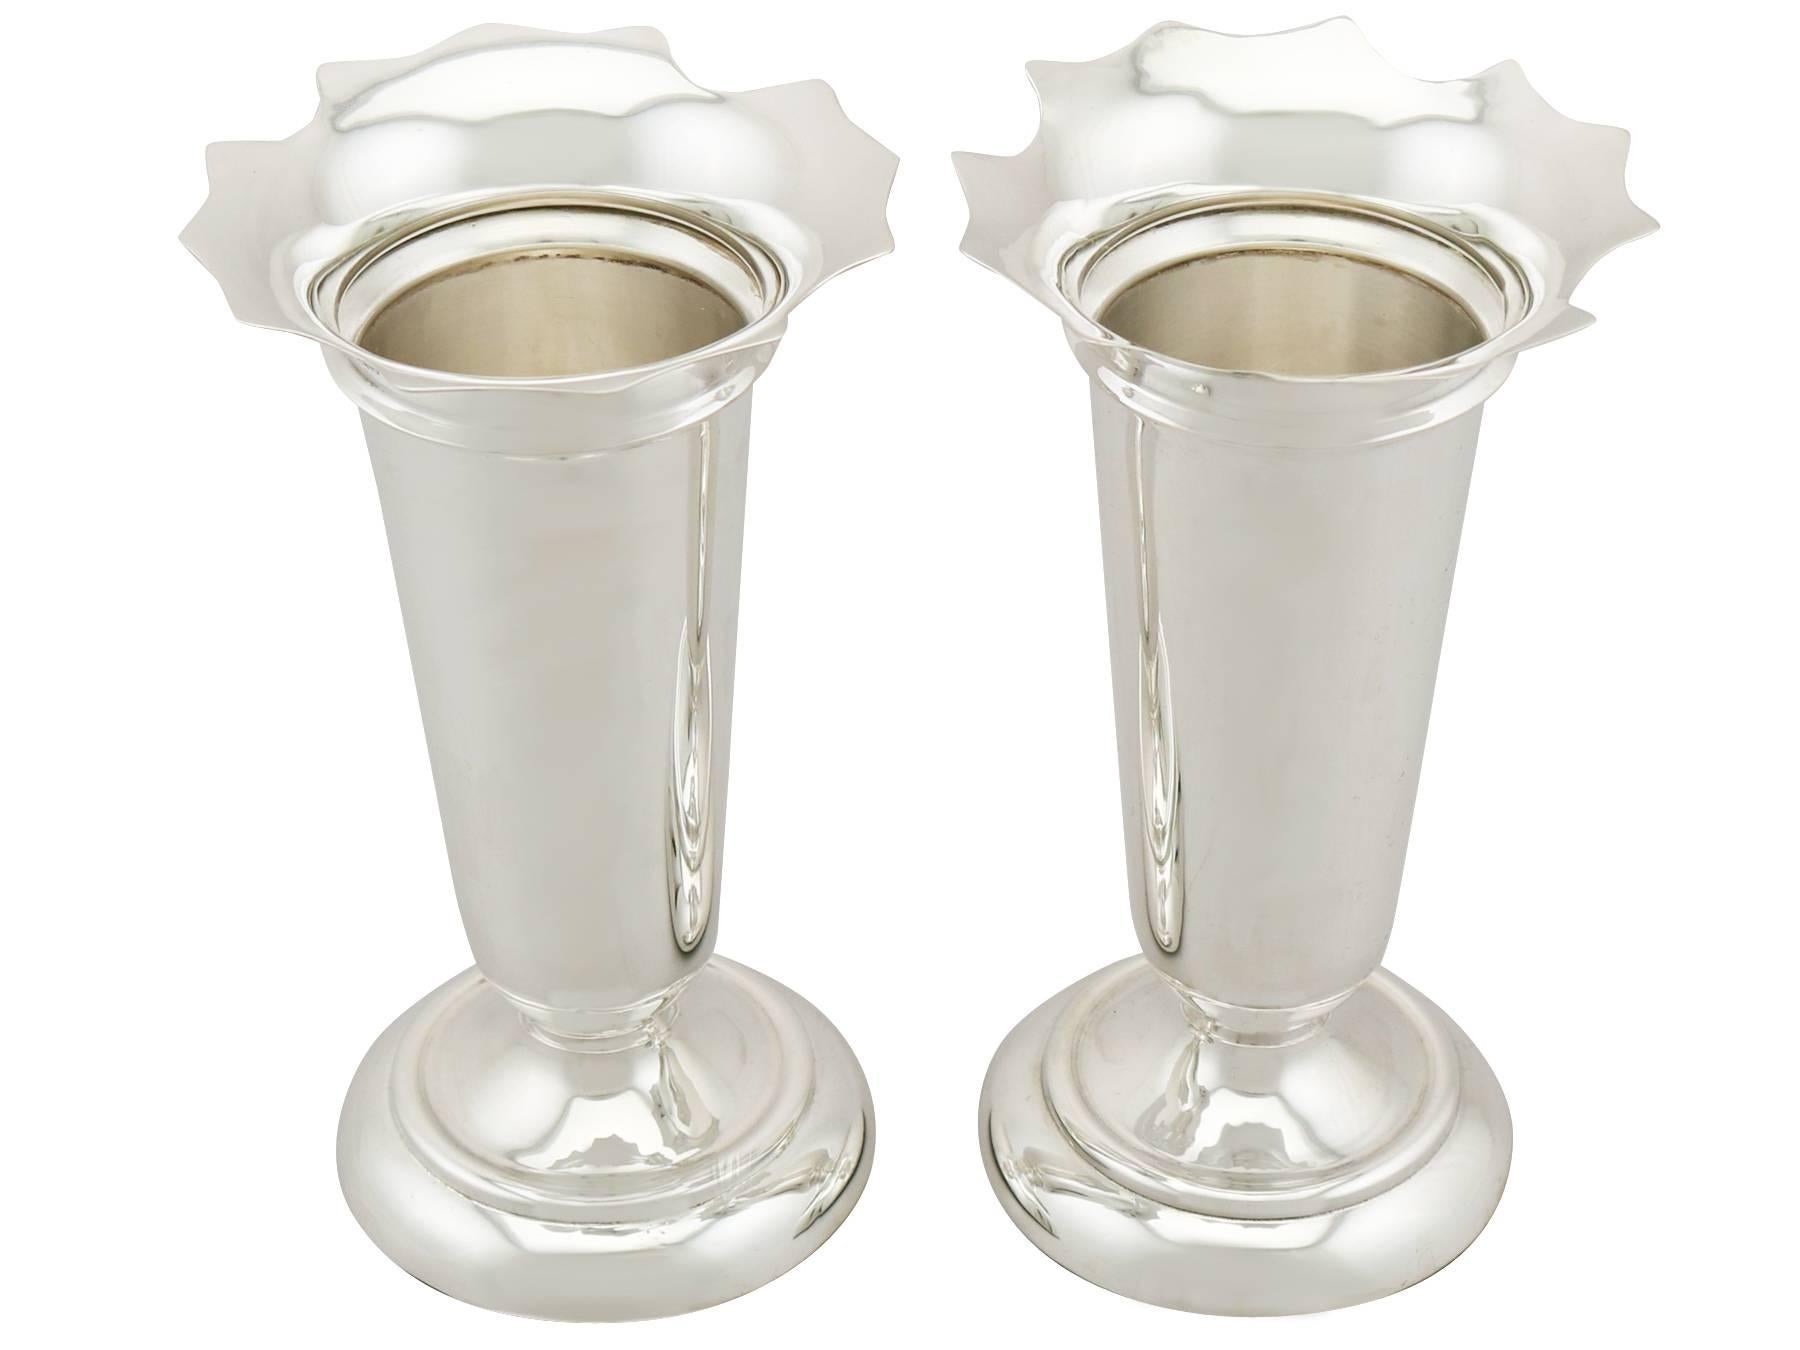 A fine pair of antique George V English sterling silver vases; an addition to our ornamental silverware collection.

These impressive antique sterling silver vases have a tapering cylindrical form with a flared incurved, shaped rim.

The surface